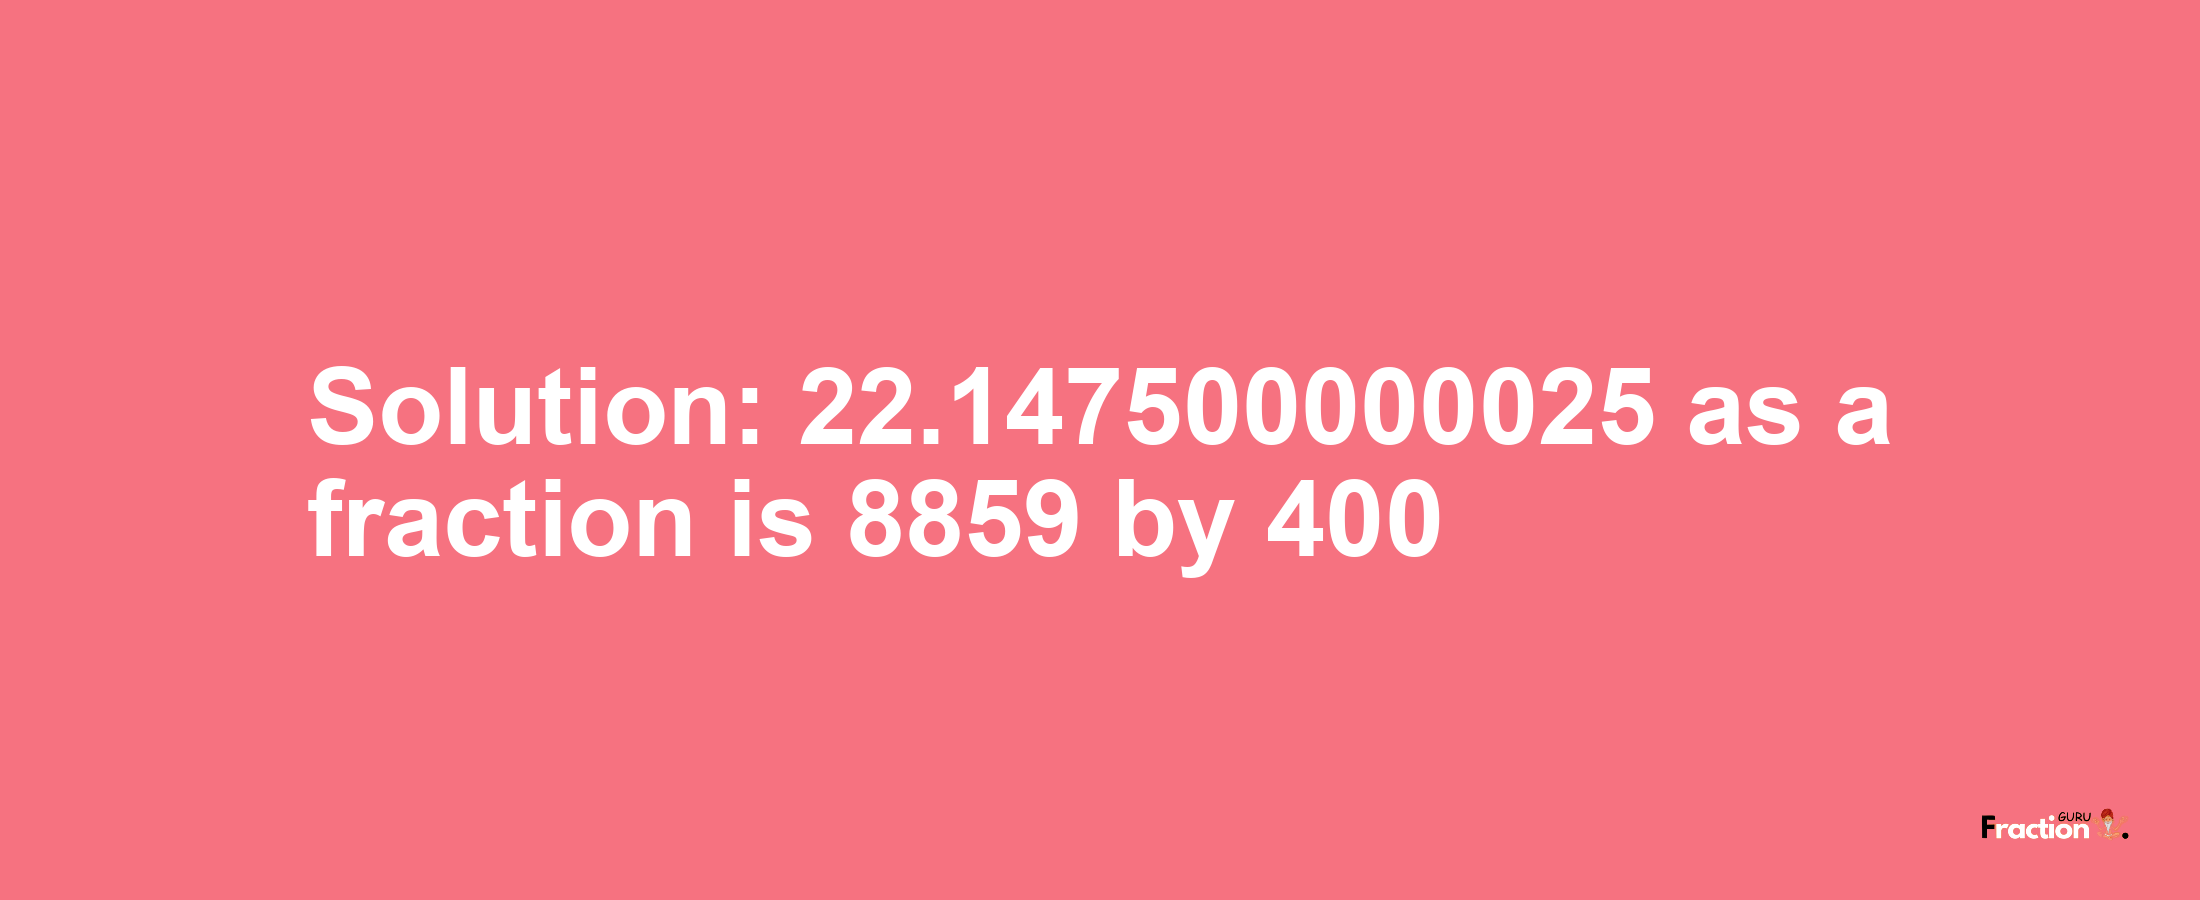 Solution:22.147500000025 as a fraction is 8859/400